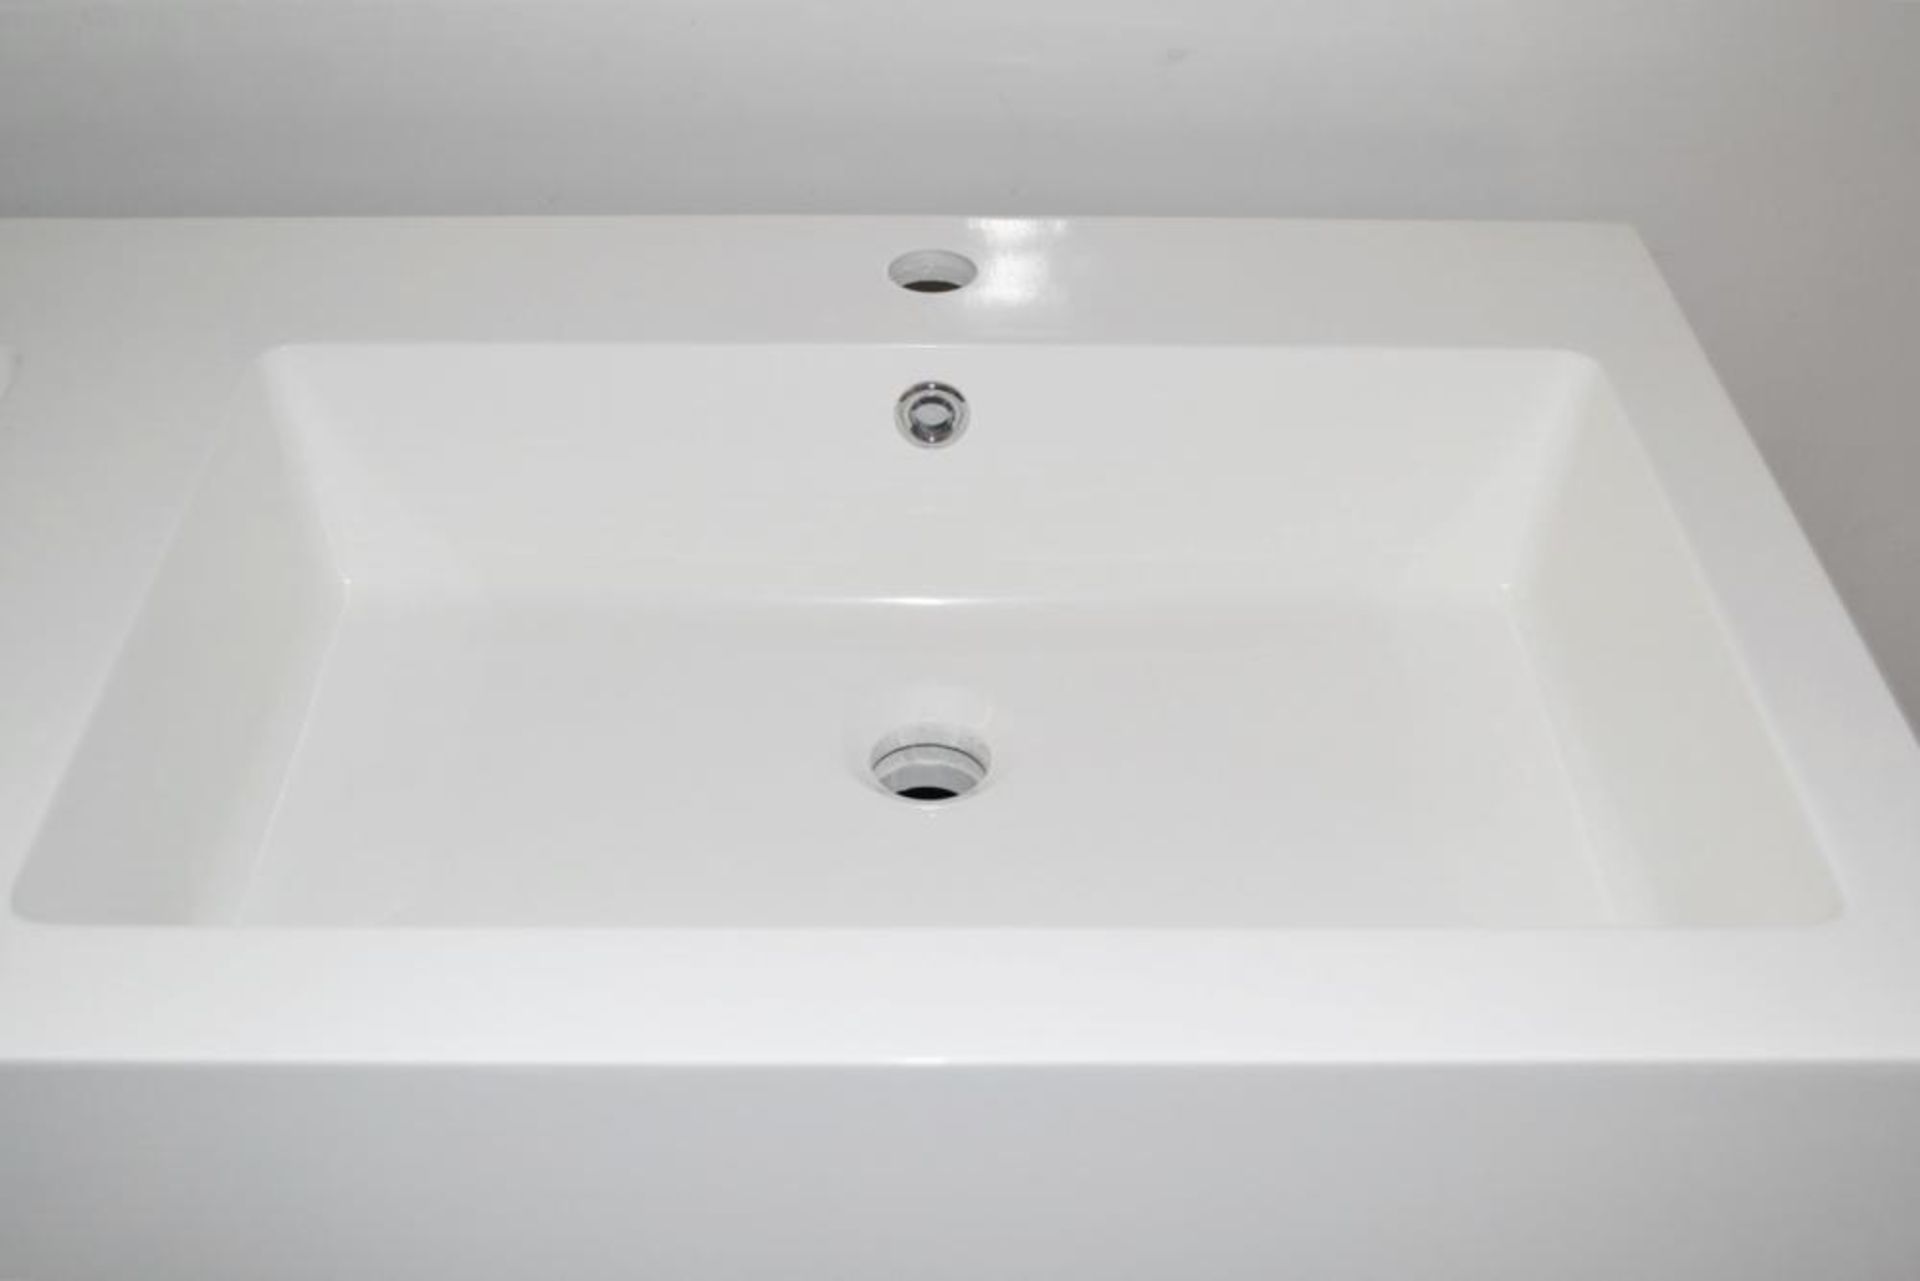 1 x Gloss White 1200mm 4-Door Double Basin Freestanding Bathroom Cabinet - New & Boxed Stock - CL307 - Image 2 of 7